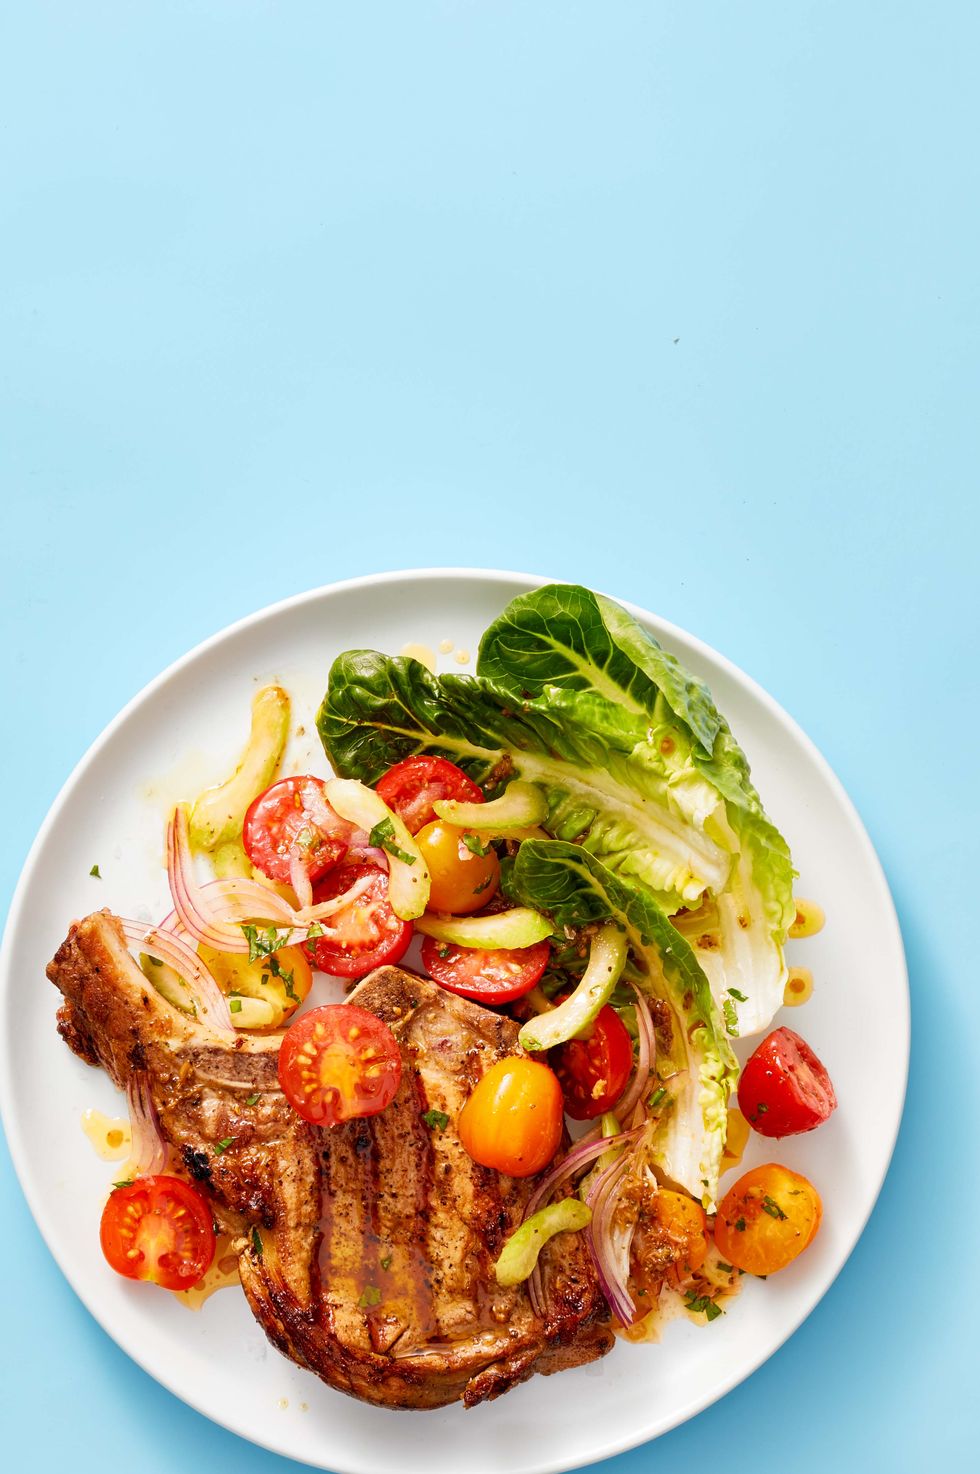 https://hips.hearstapps.com/hmg-prod/images/pork-chops-with-bloody-mary-tomato-salad-1619657081.jpg?crop=0.692xw:0.763xh;0.121xw,0.127xh&resize=980:*